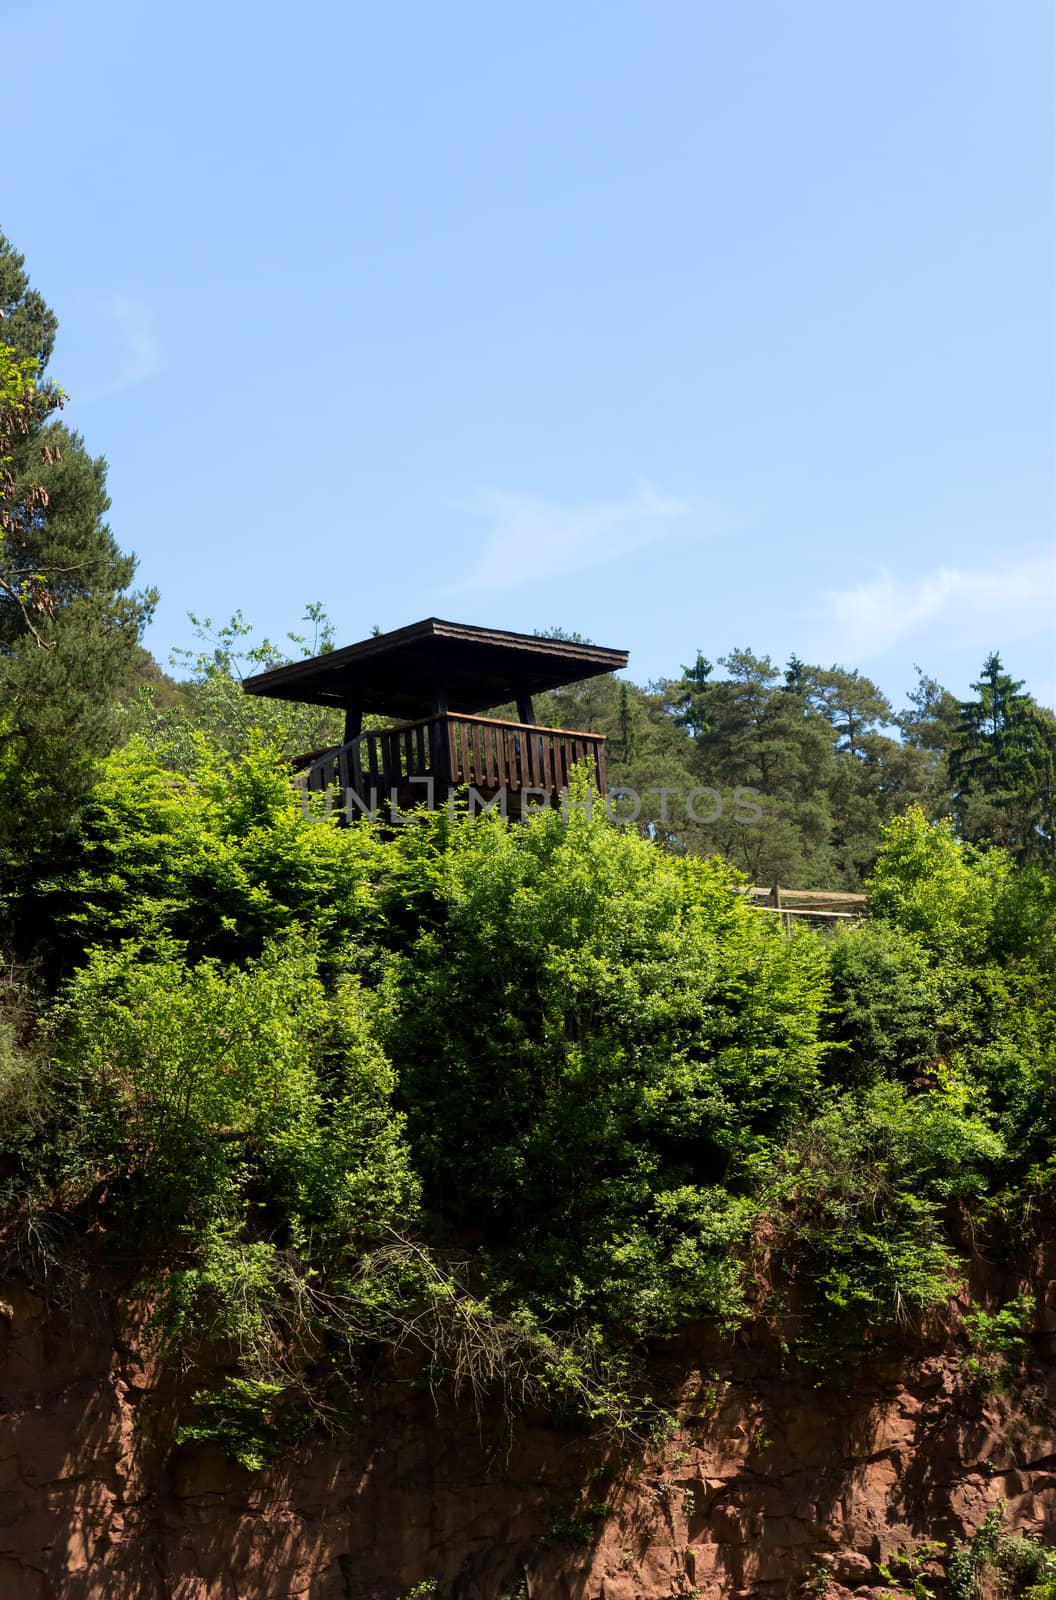 Guard tower in the forest